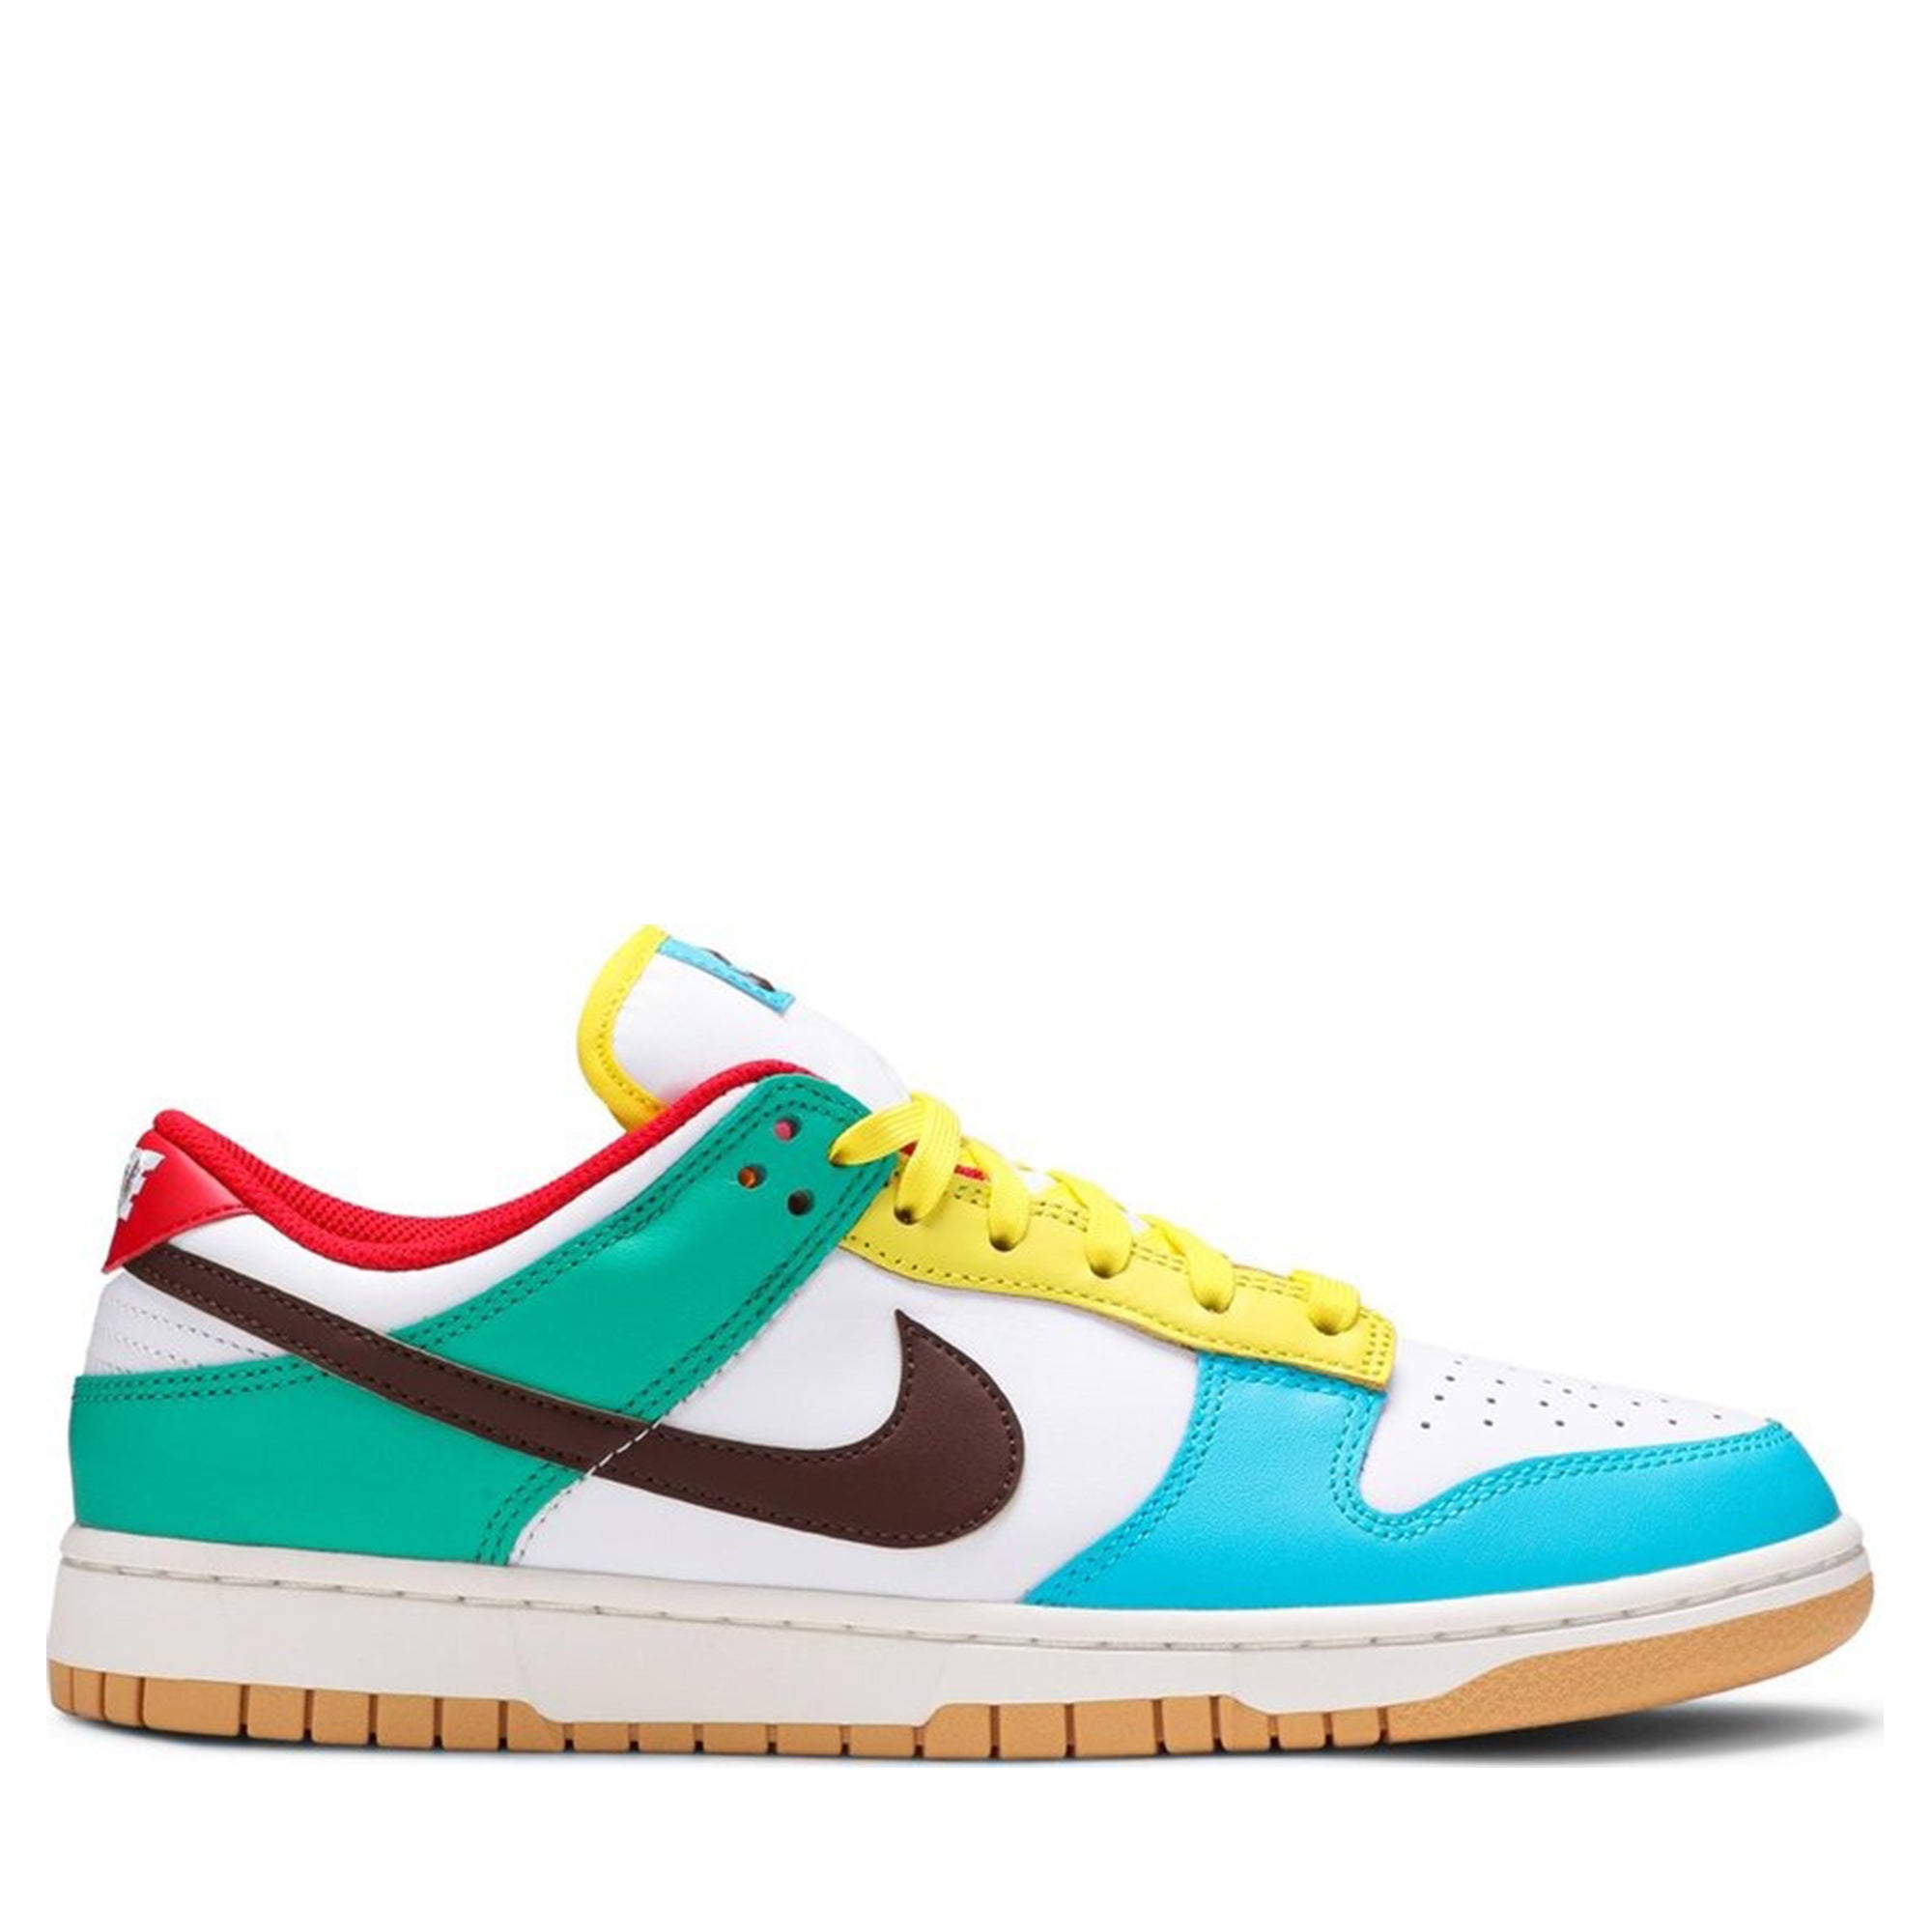 Shop Nike Dunks Sneakers in Canada | Authenticity Guaranteed